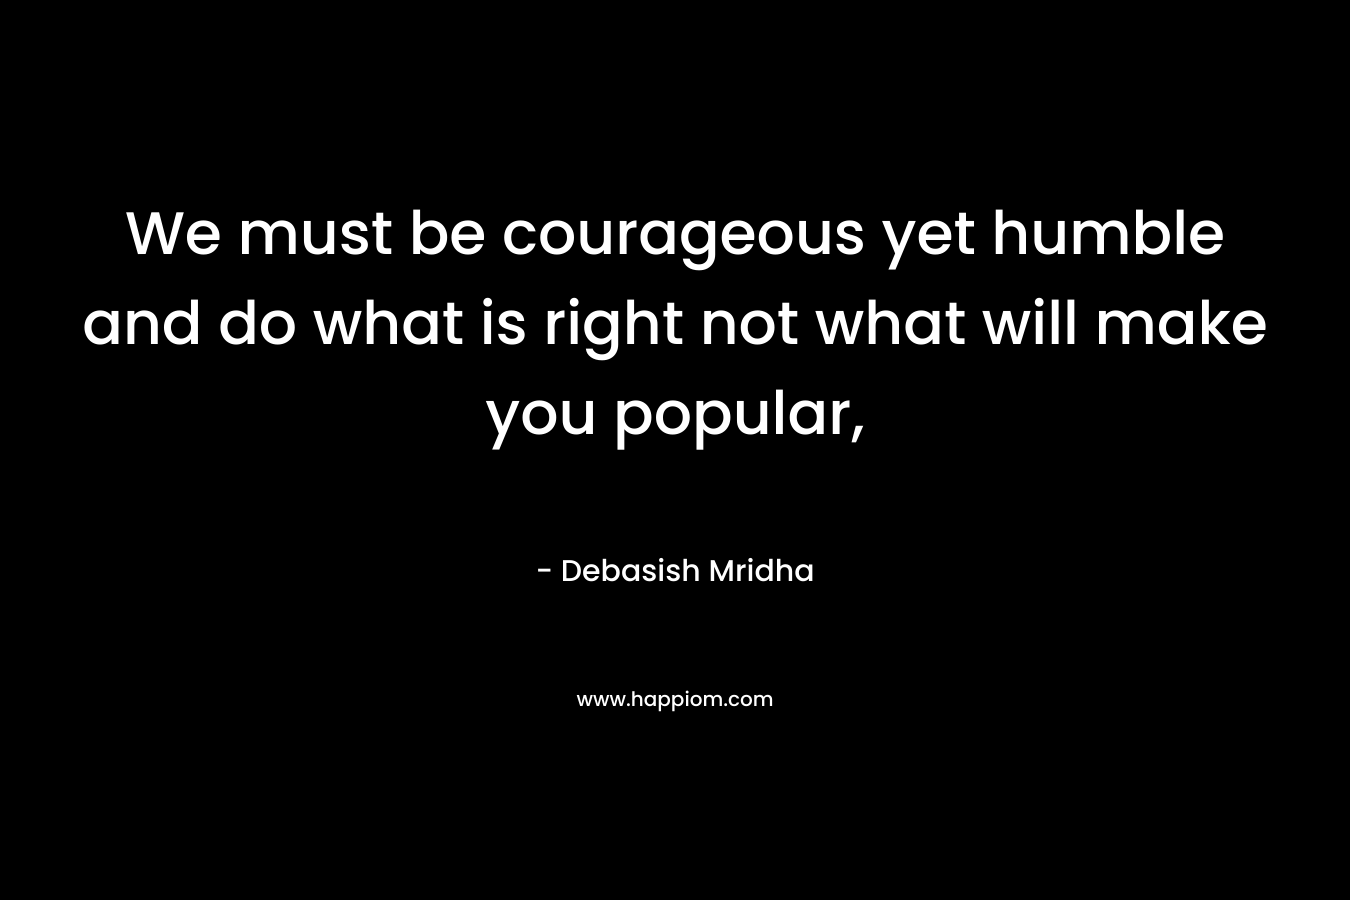 We must be courageous yet humble and do what is right not what will make you popular, – Debasish Mridha